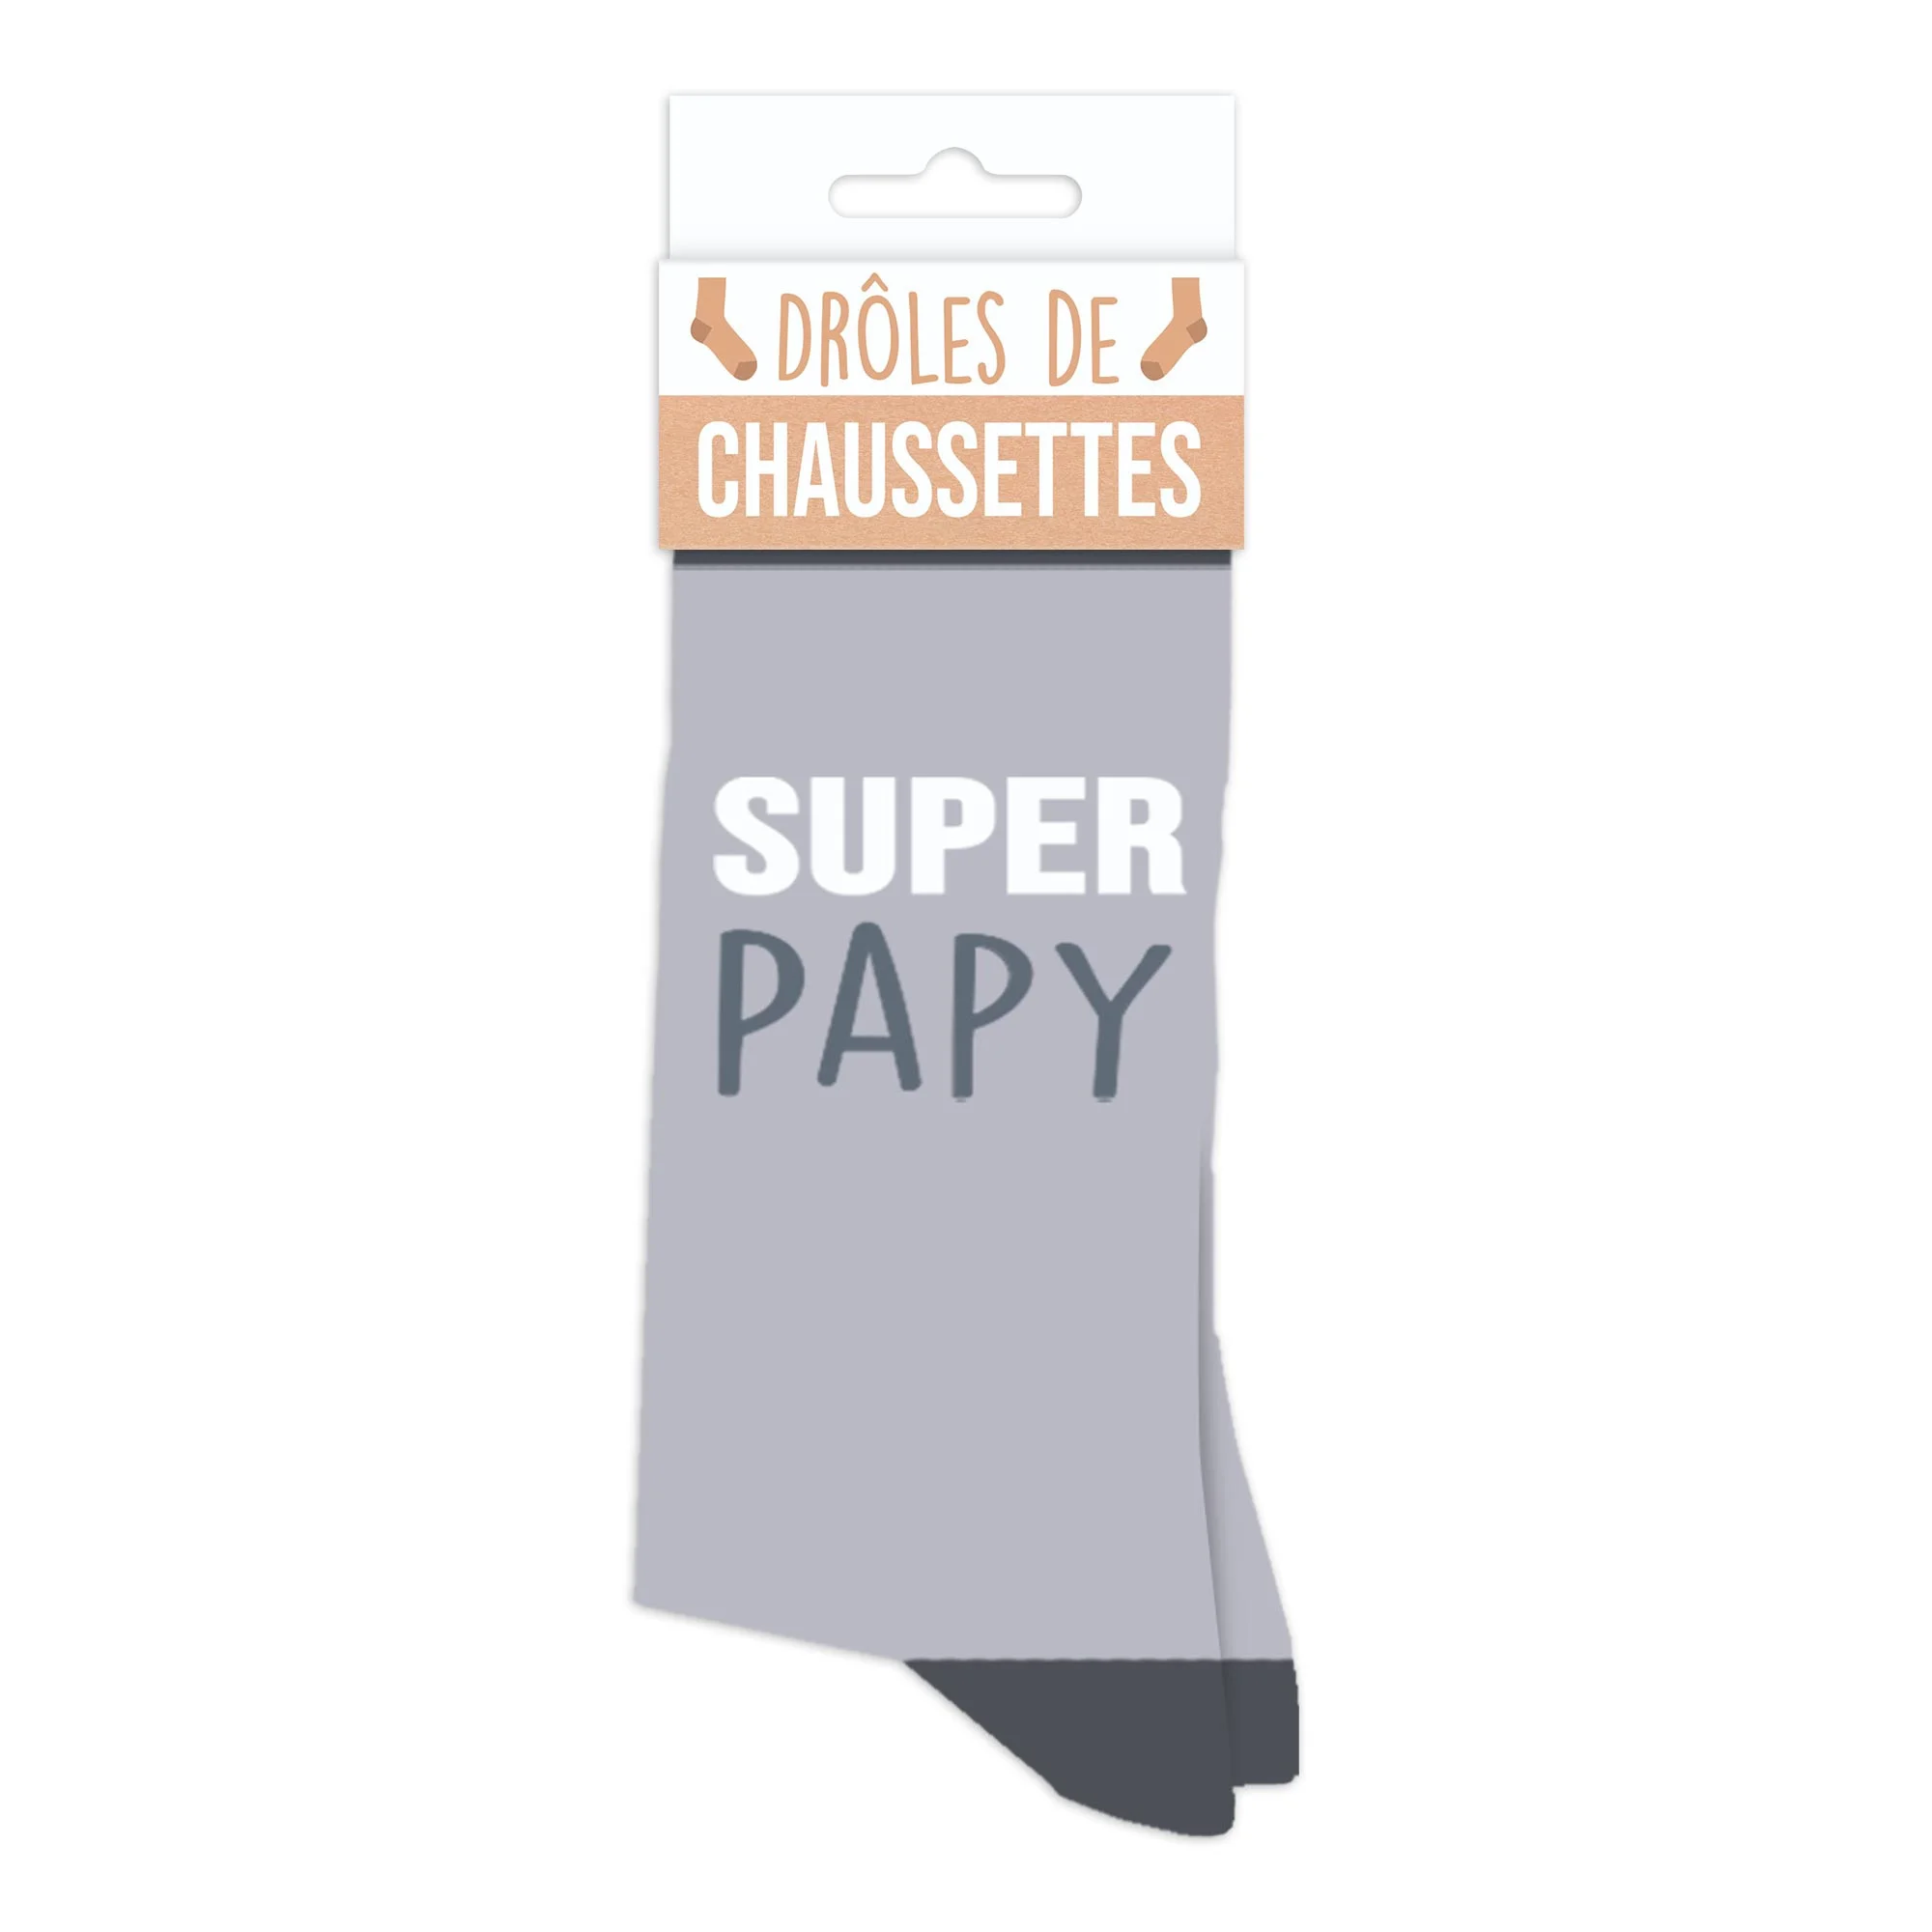 CHAUSSETTES SUPER PAPY - The KDO